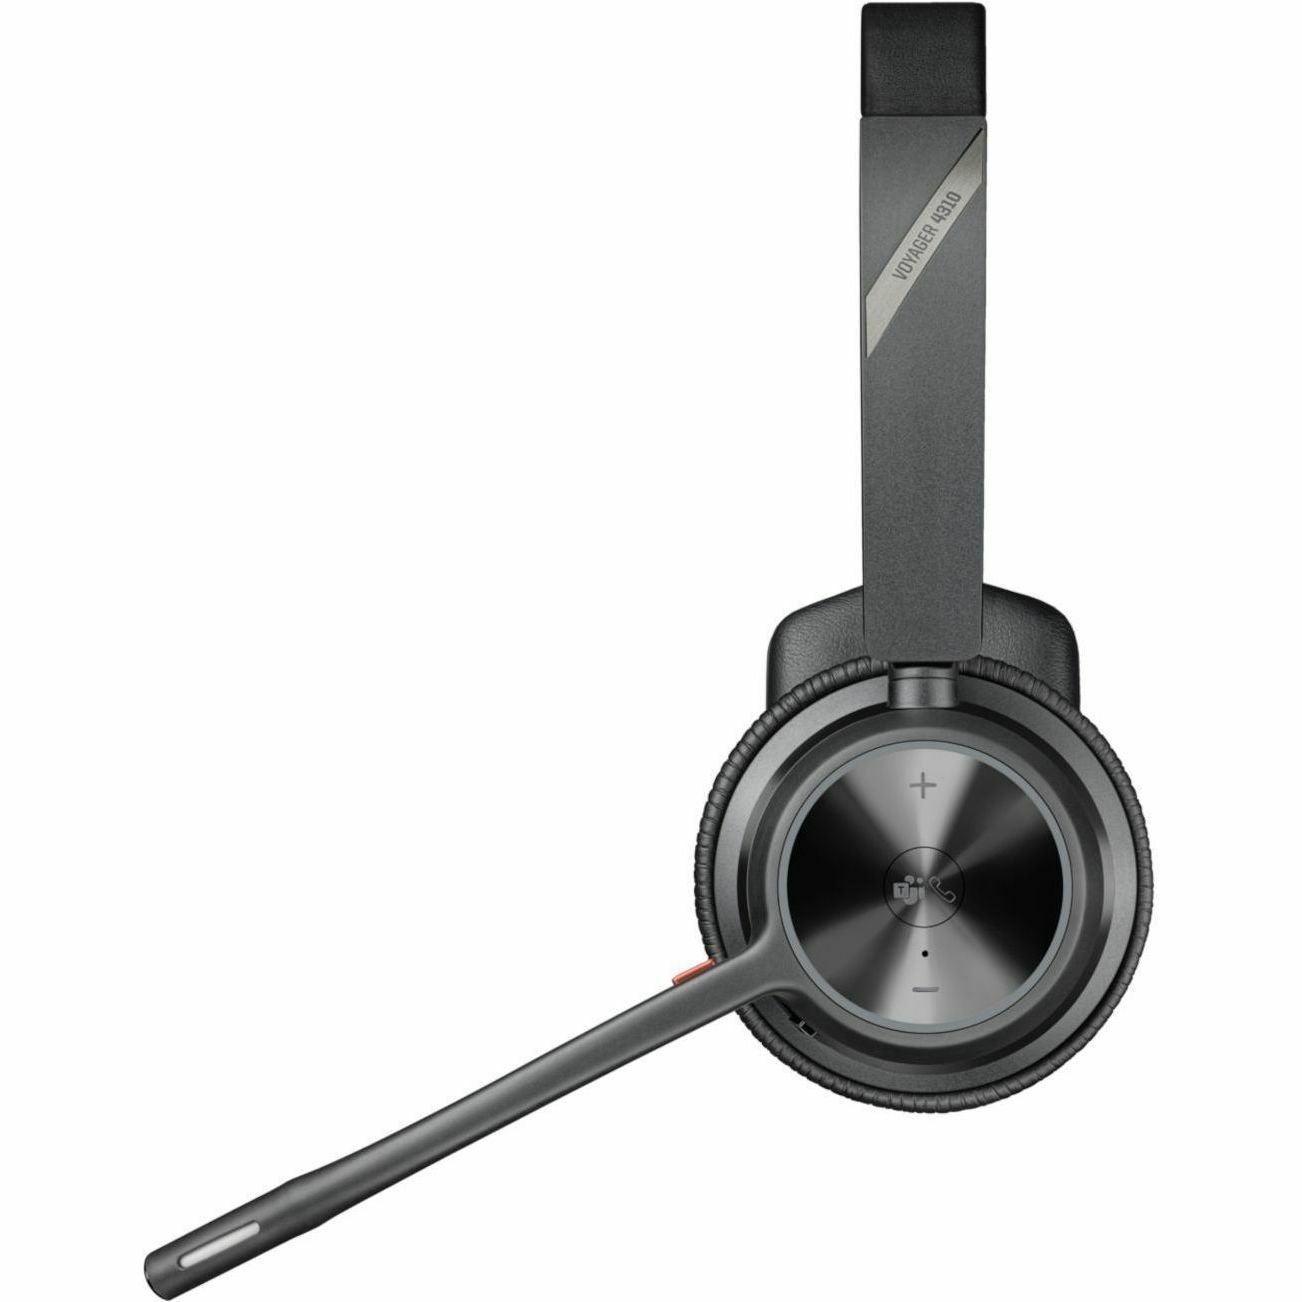 Poly Voyager 4310-M Headset